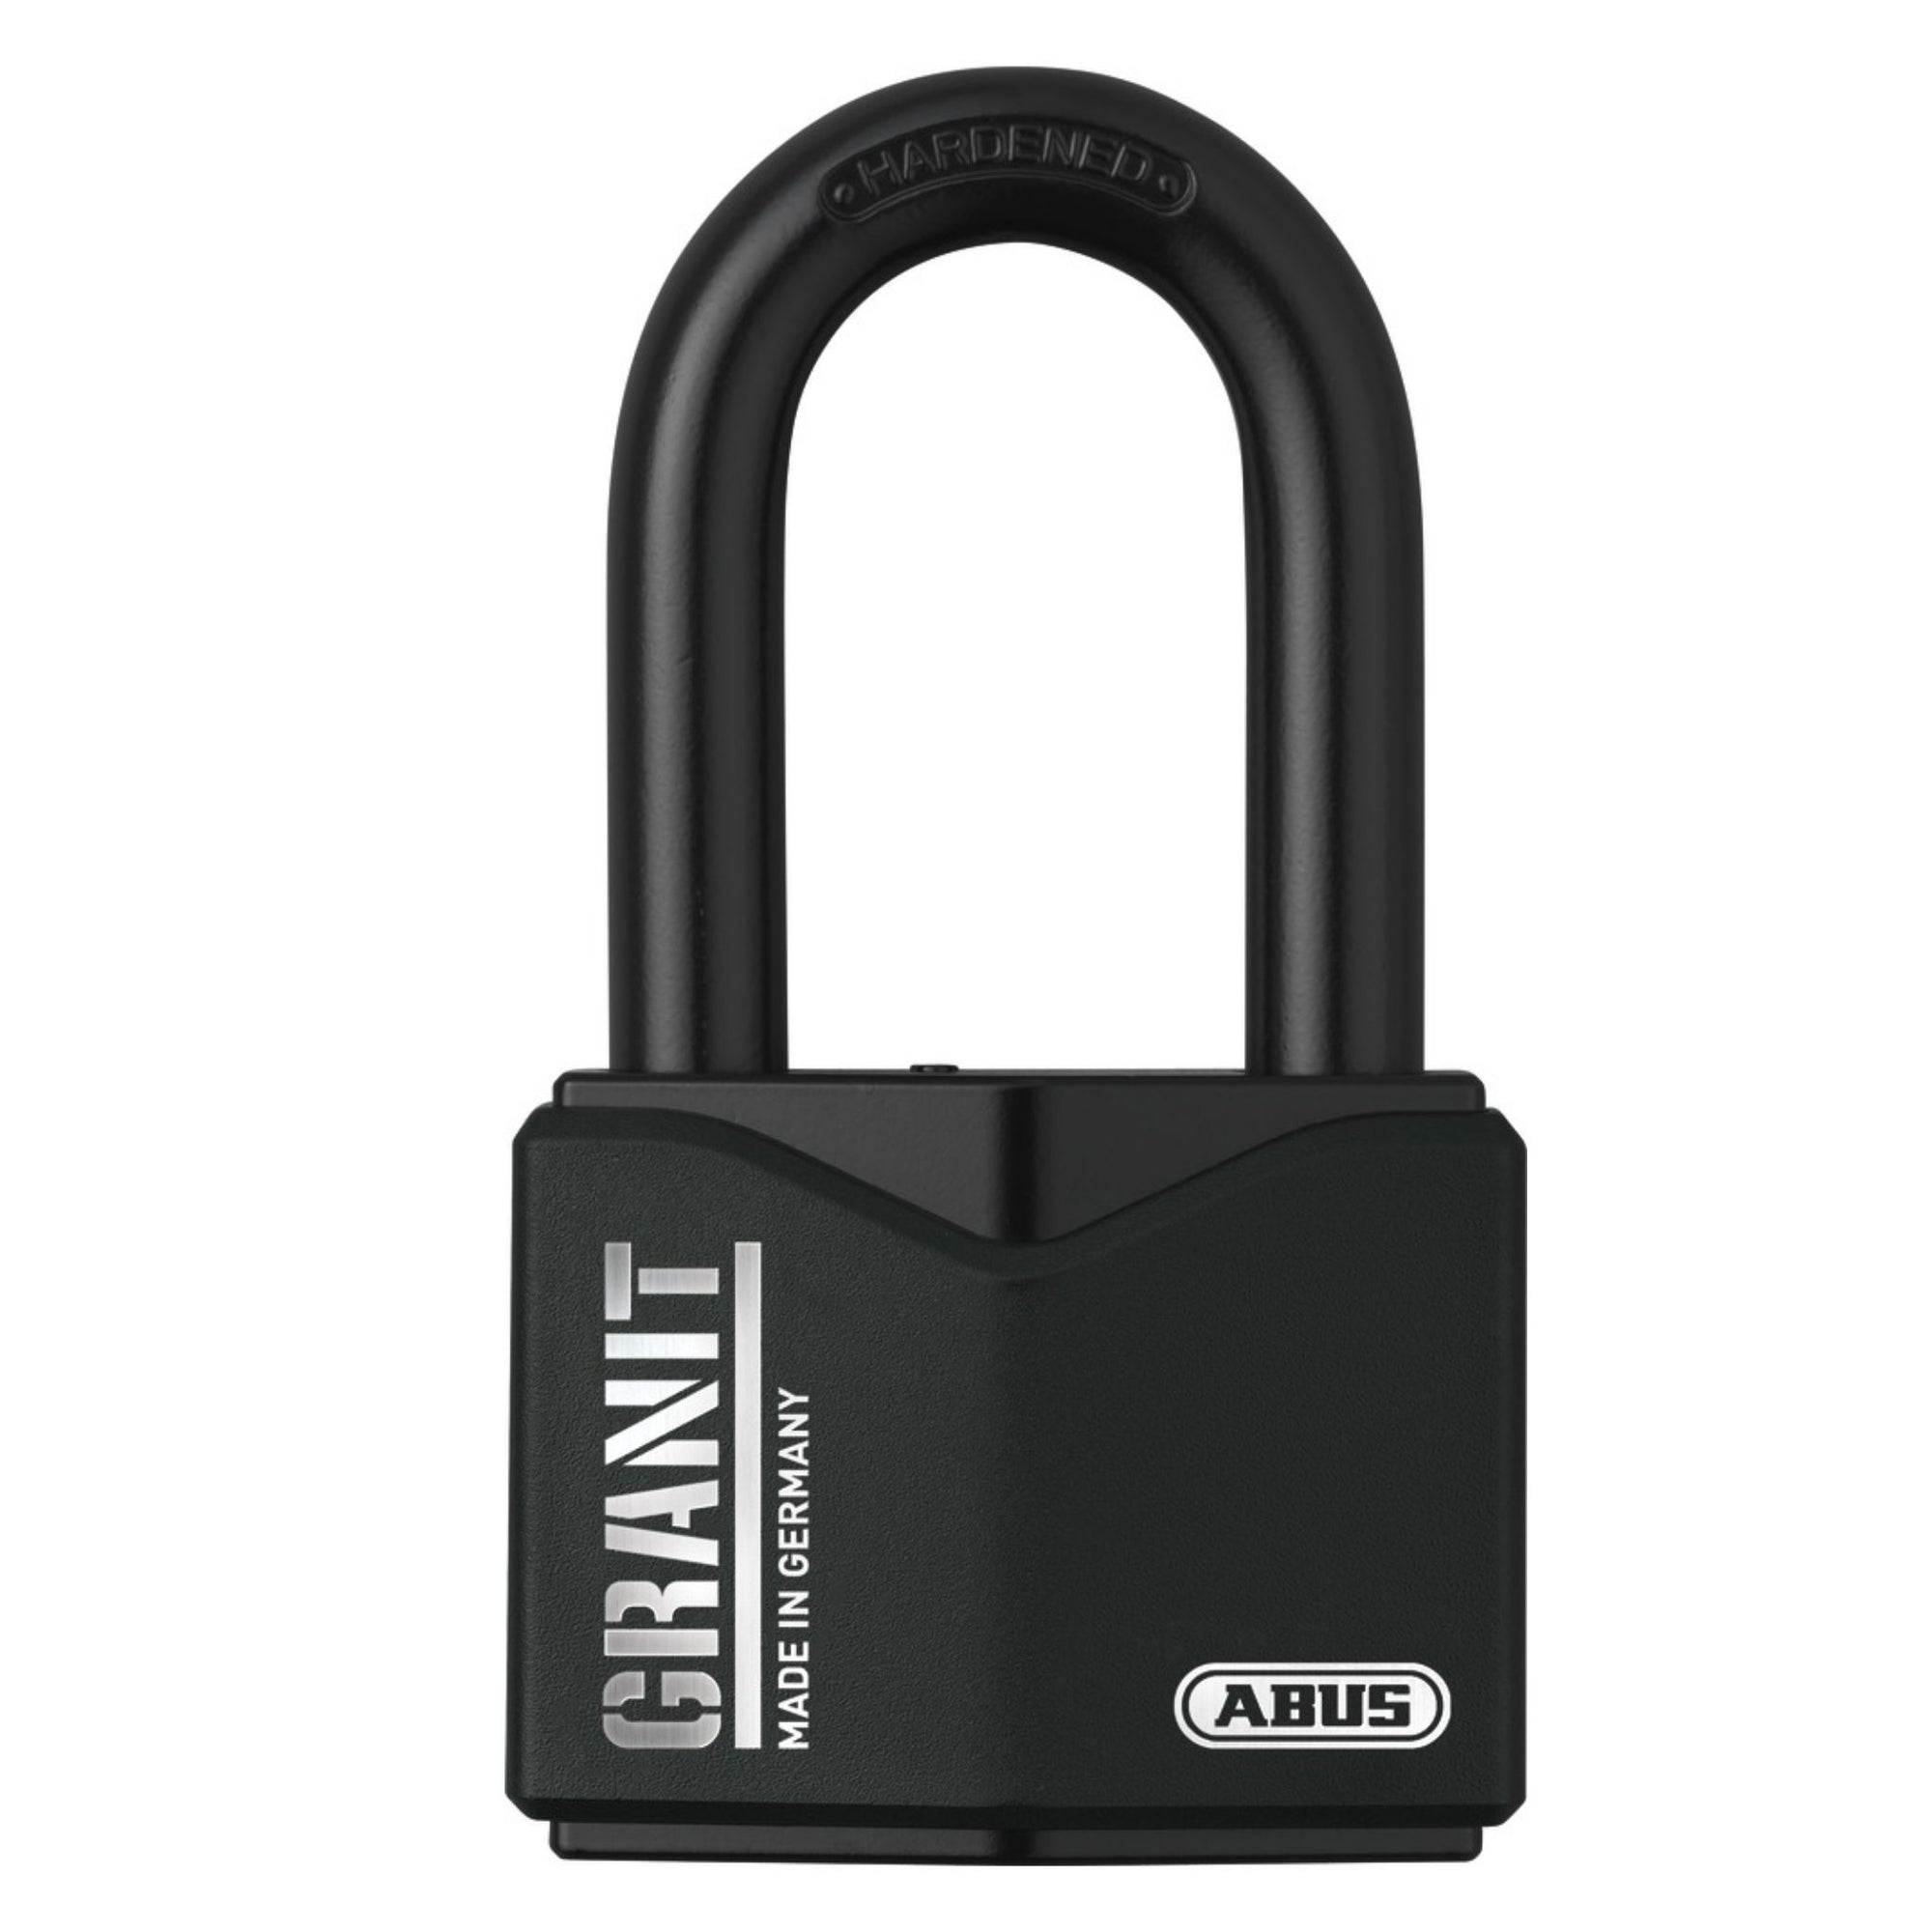 Abus 37/55HB50 KD Granit Padlock with 2-Inch Shackle - The Lock Source